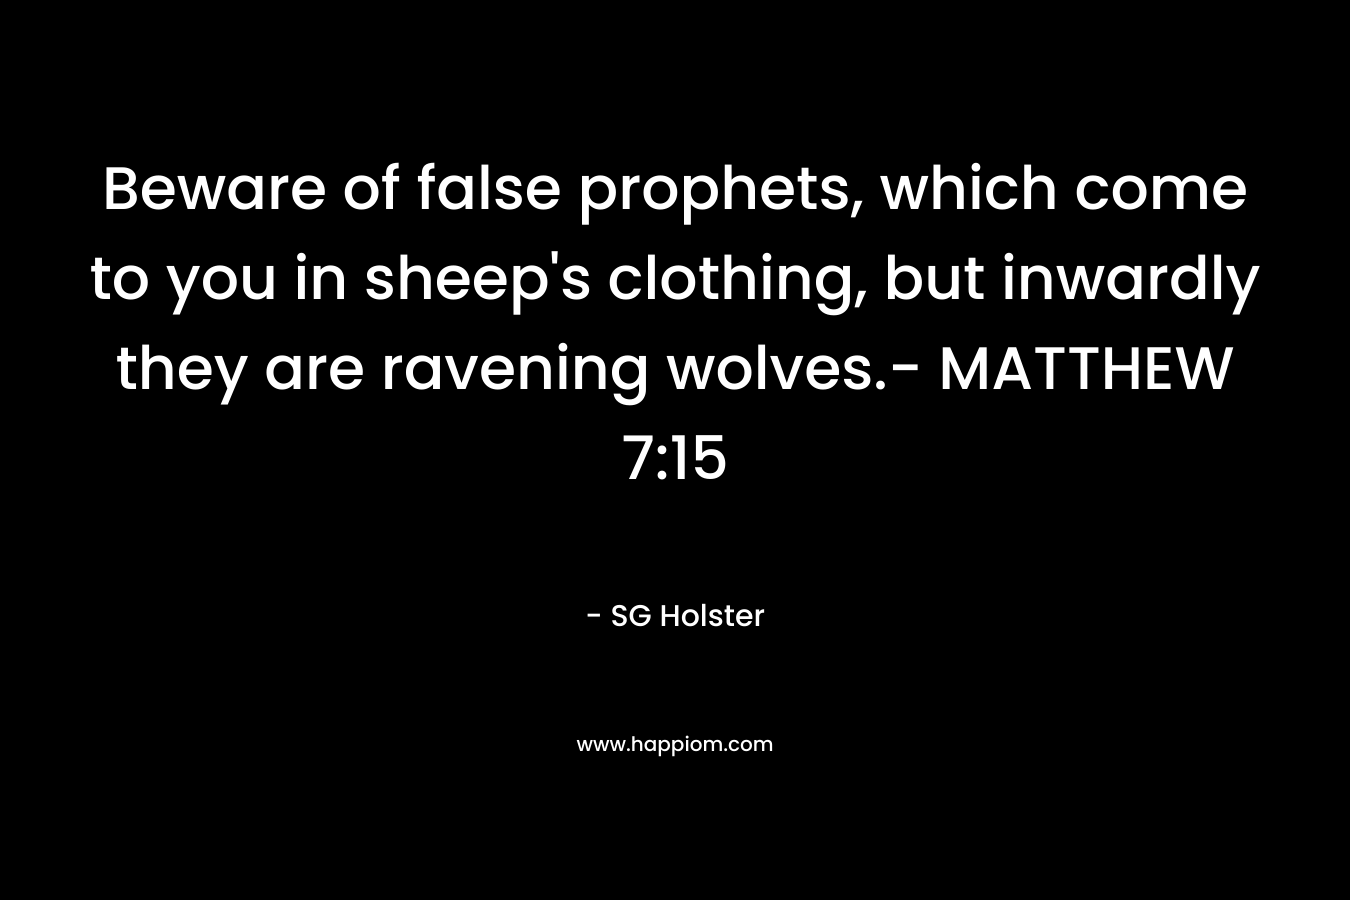 Beware of false prophets, which come to you in sheep’s clothing, but inwardly they are ravening wolves.- MATTHEW 7:15 – SG Holster